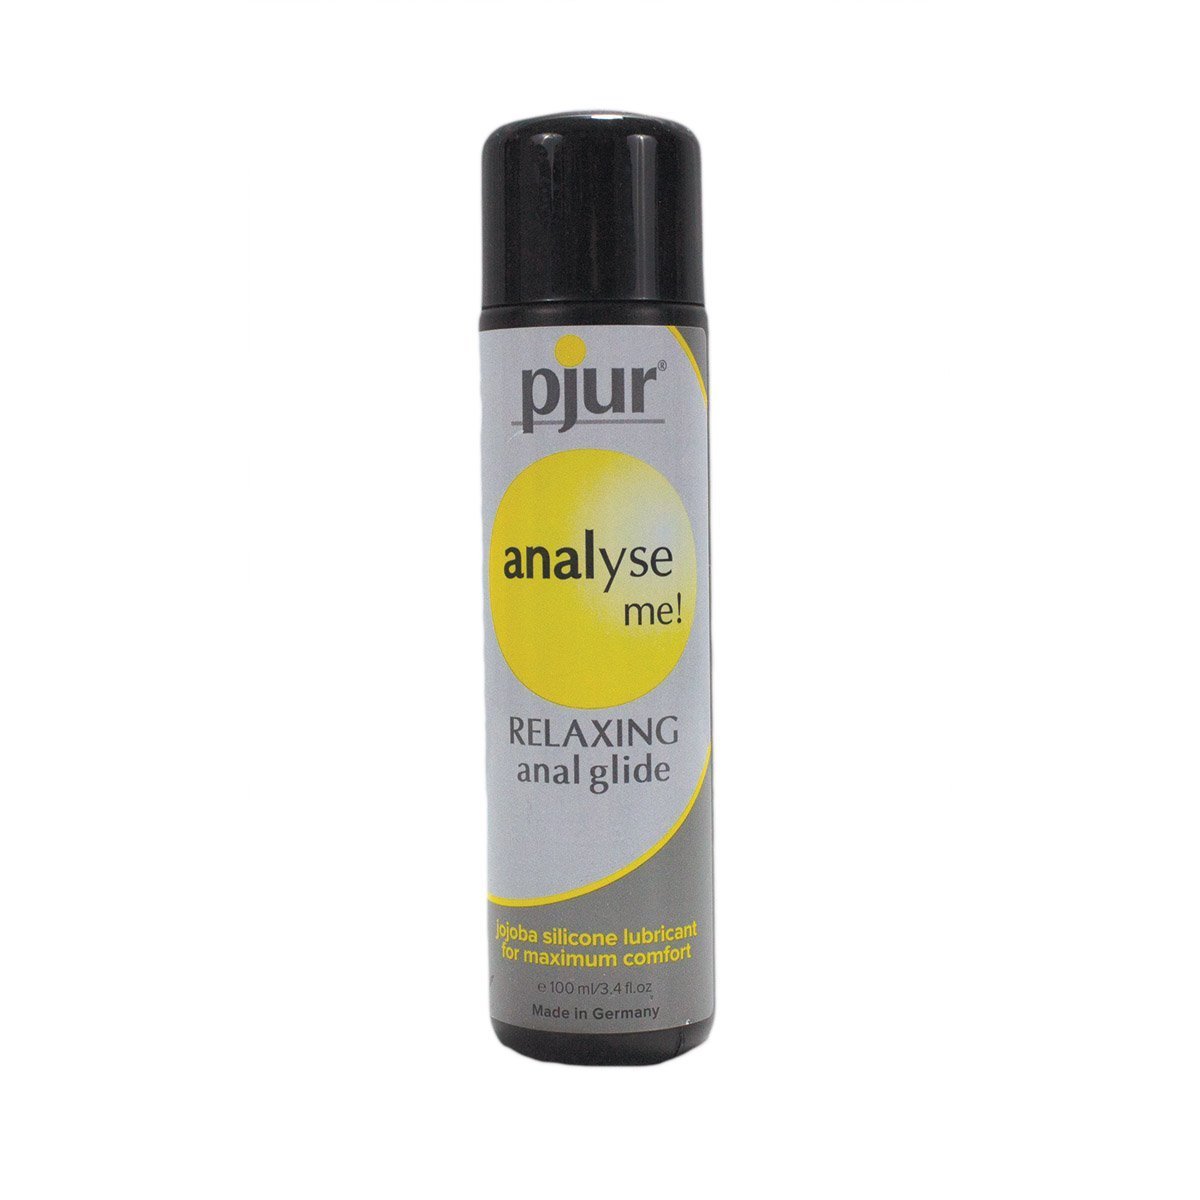 Pjur Analyse Me Silicone Based Anal Lubricant - 3.4 oz - Lube, Toy Care and Better Sex